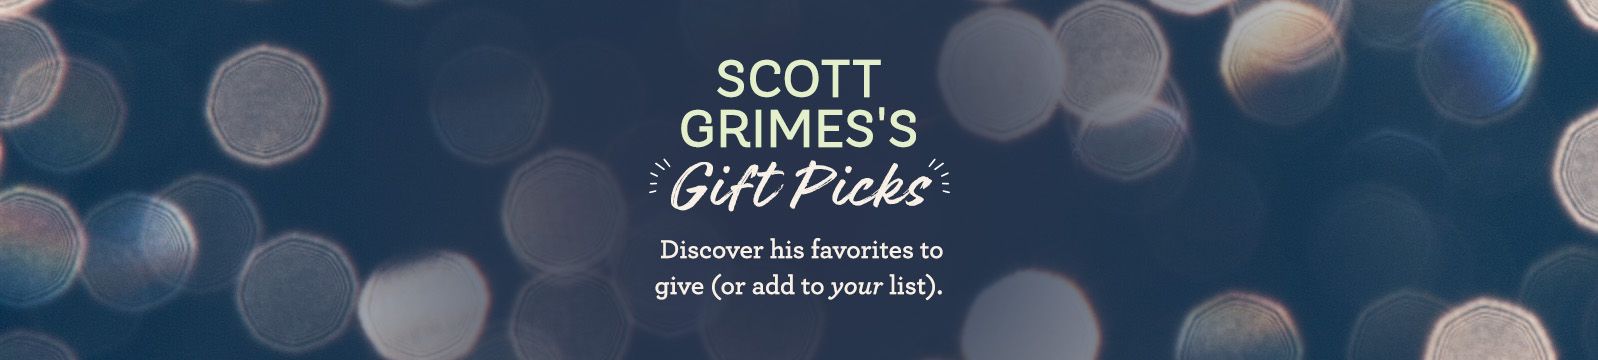 Scott Grimes's Gift Picks Discover his favorites to give (or add to your list).